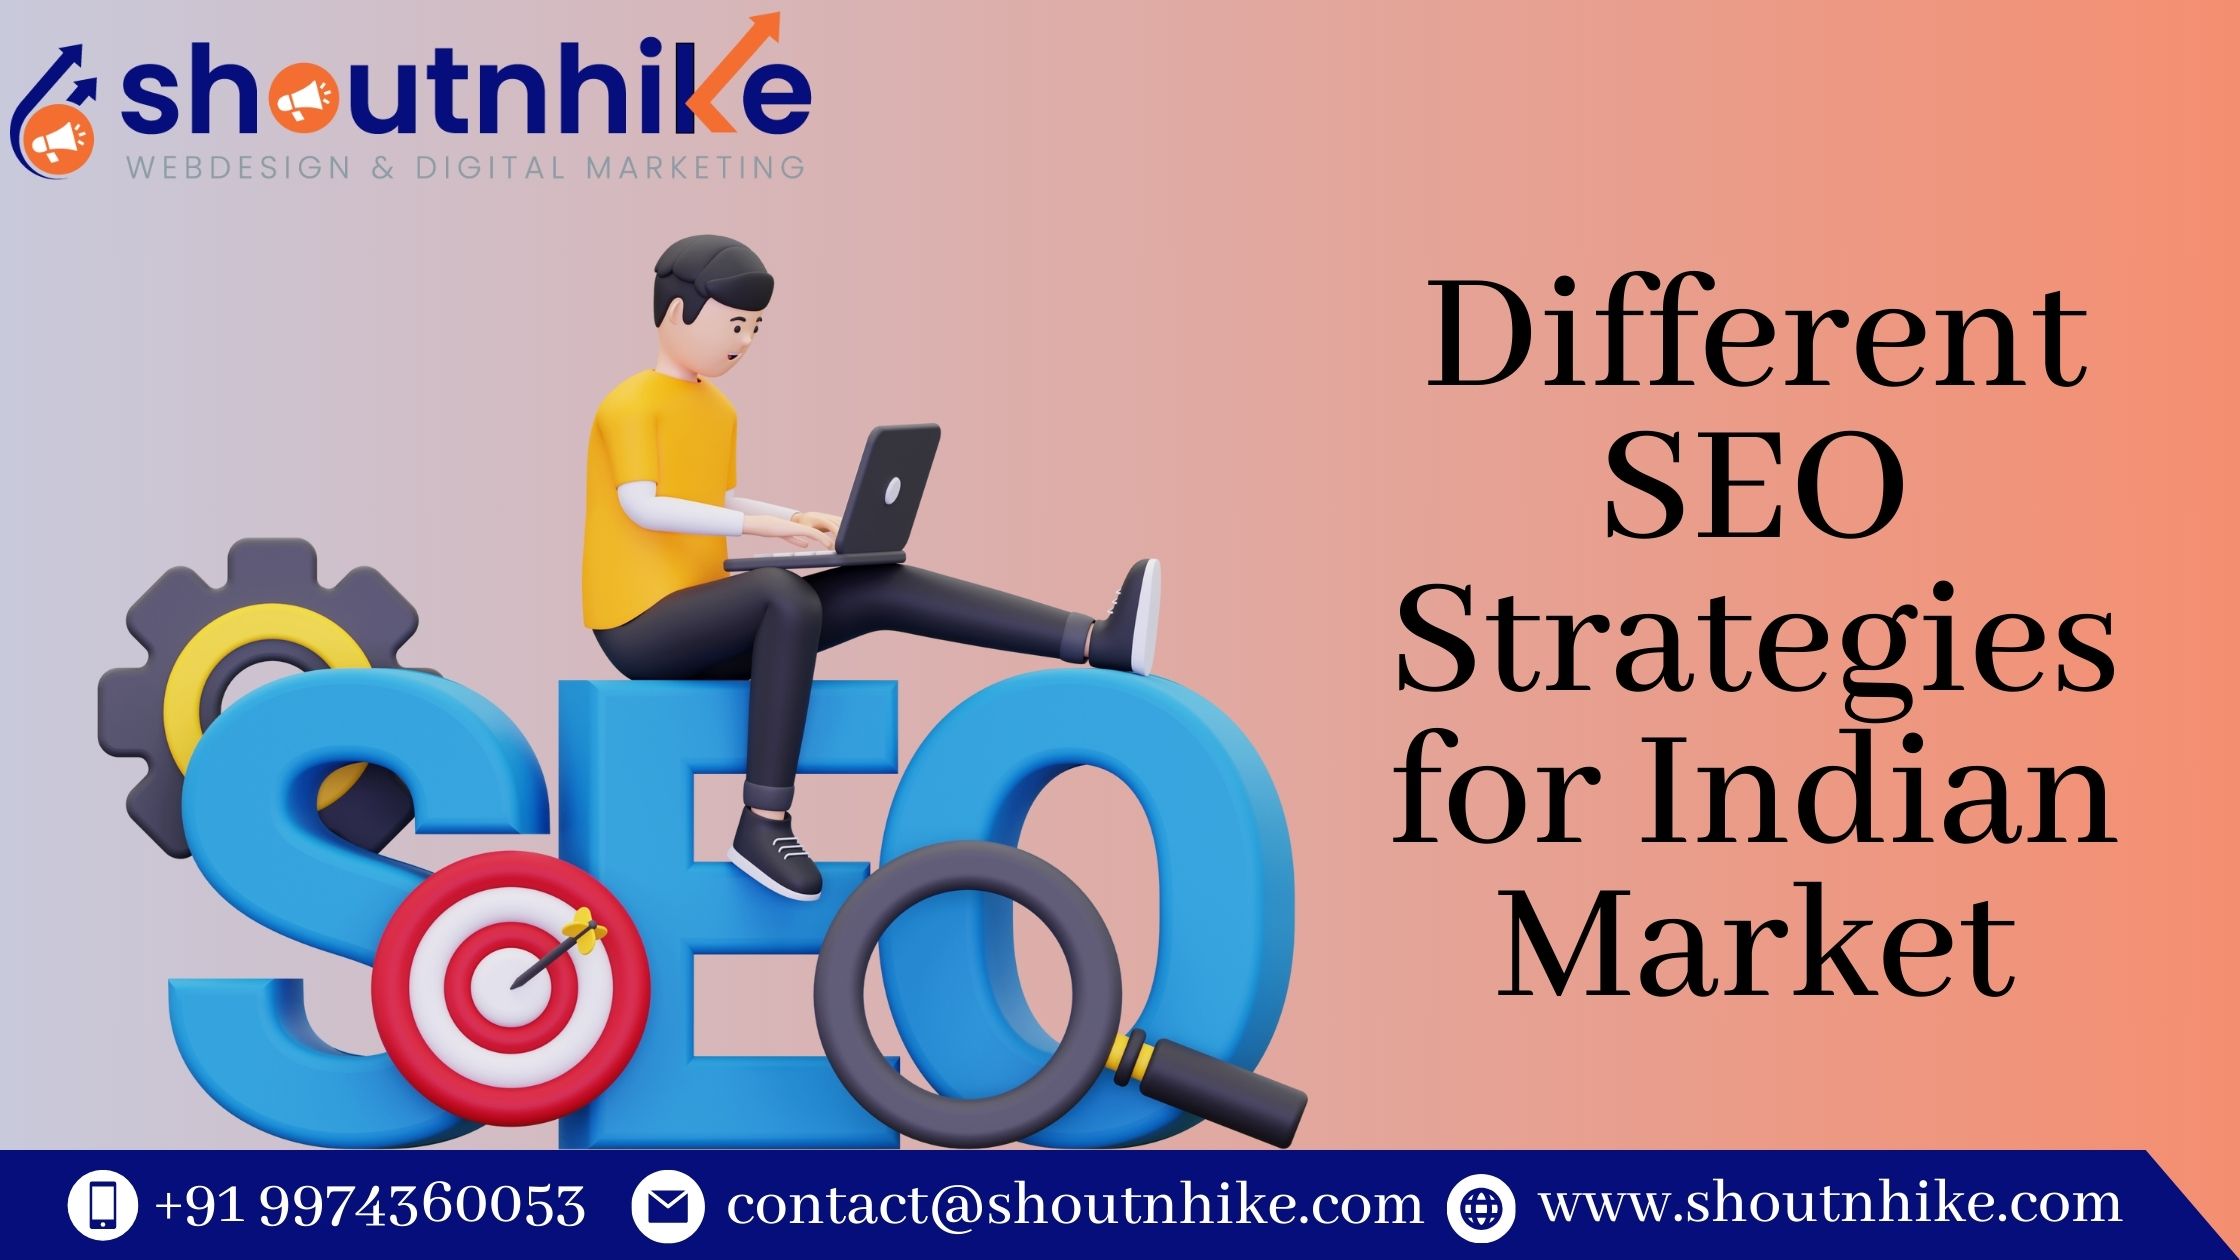 Different SEO Strategies for Indian Market